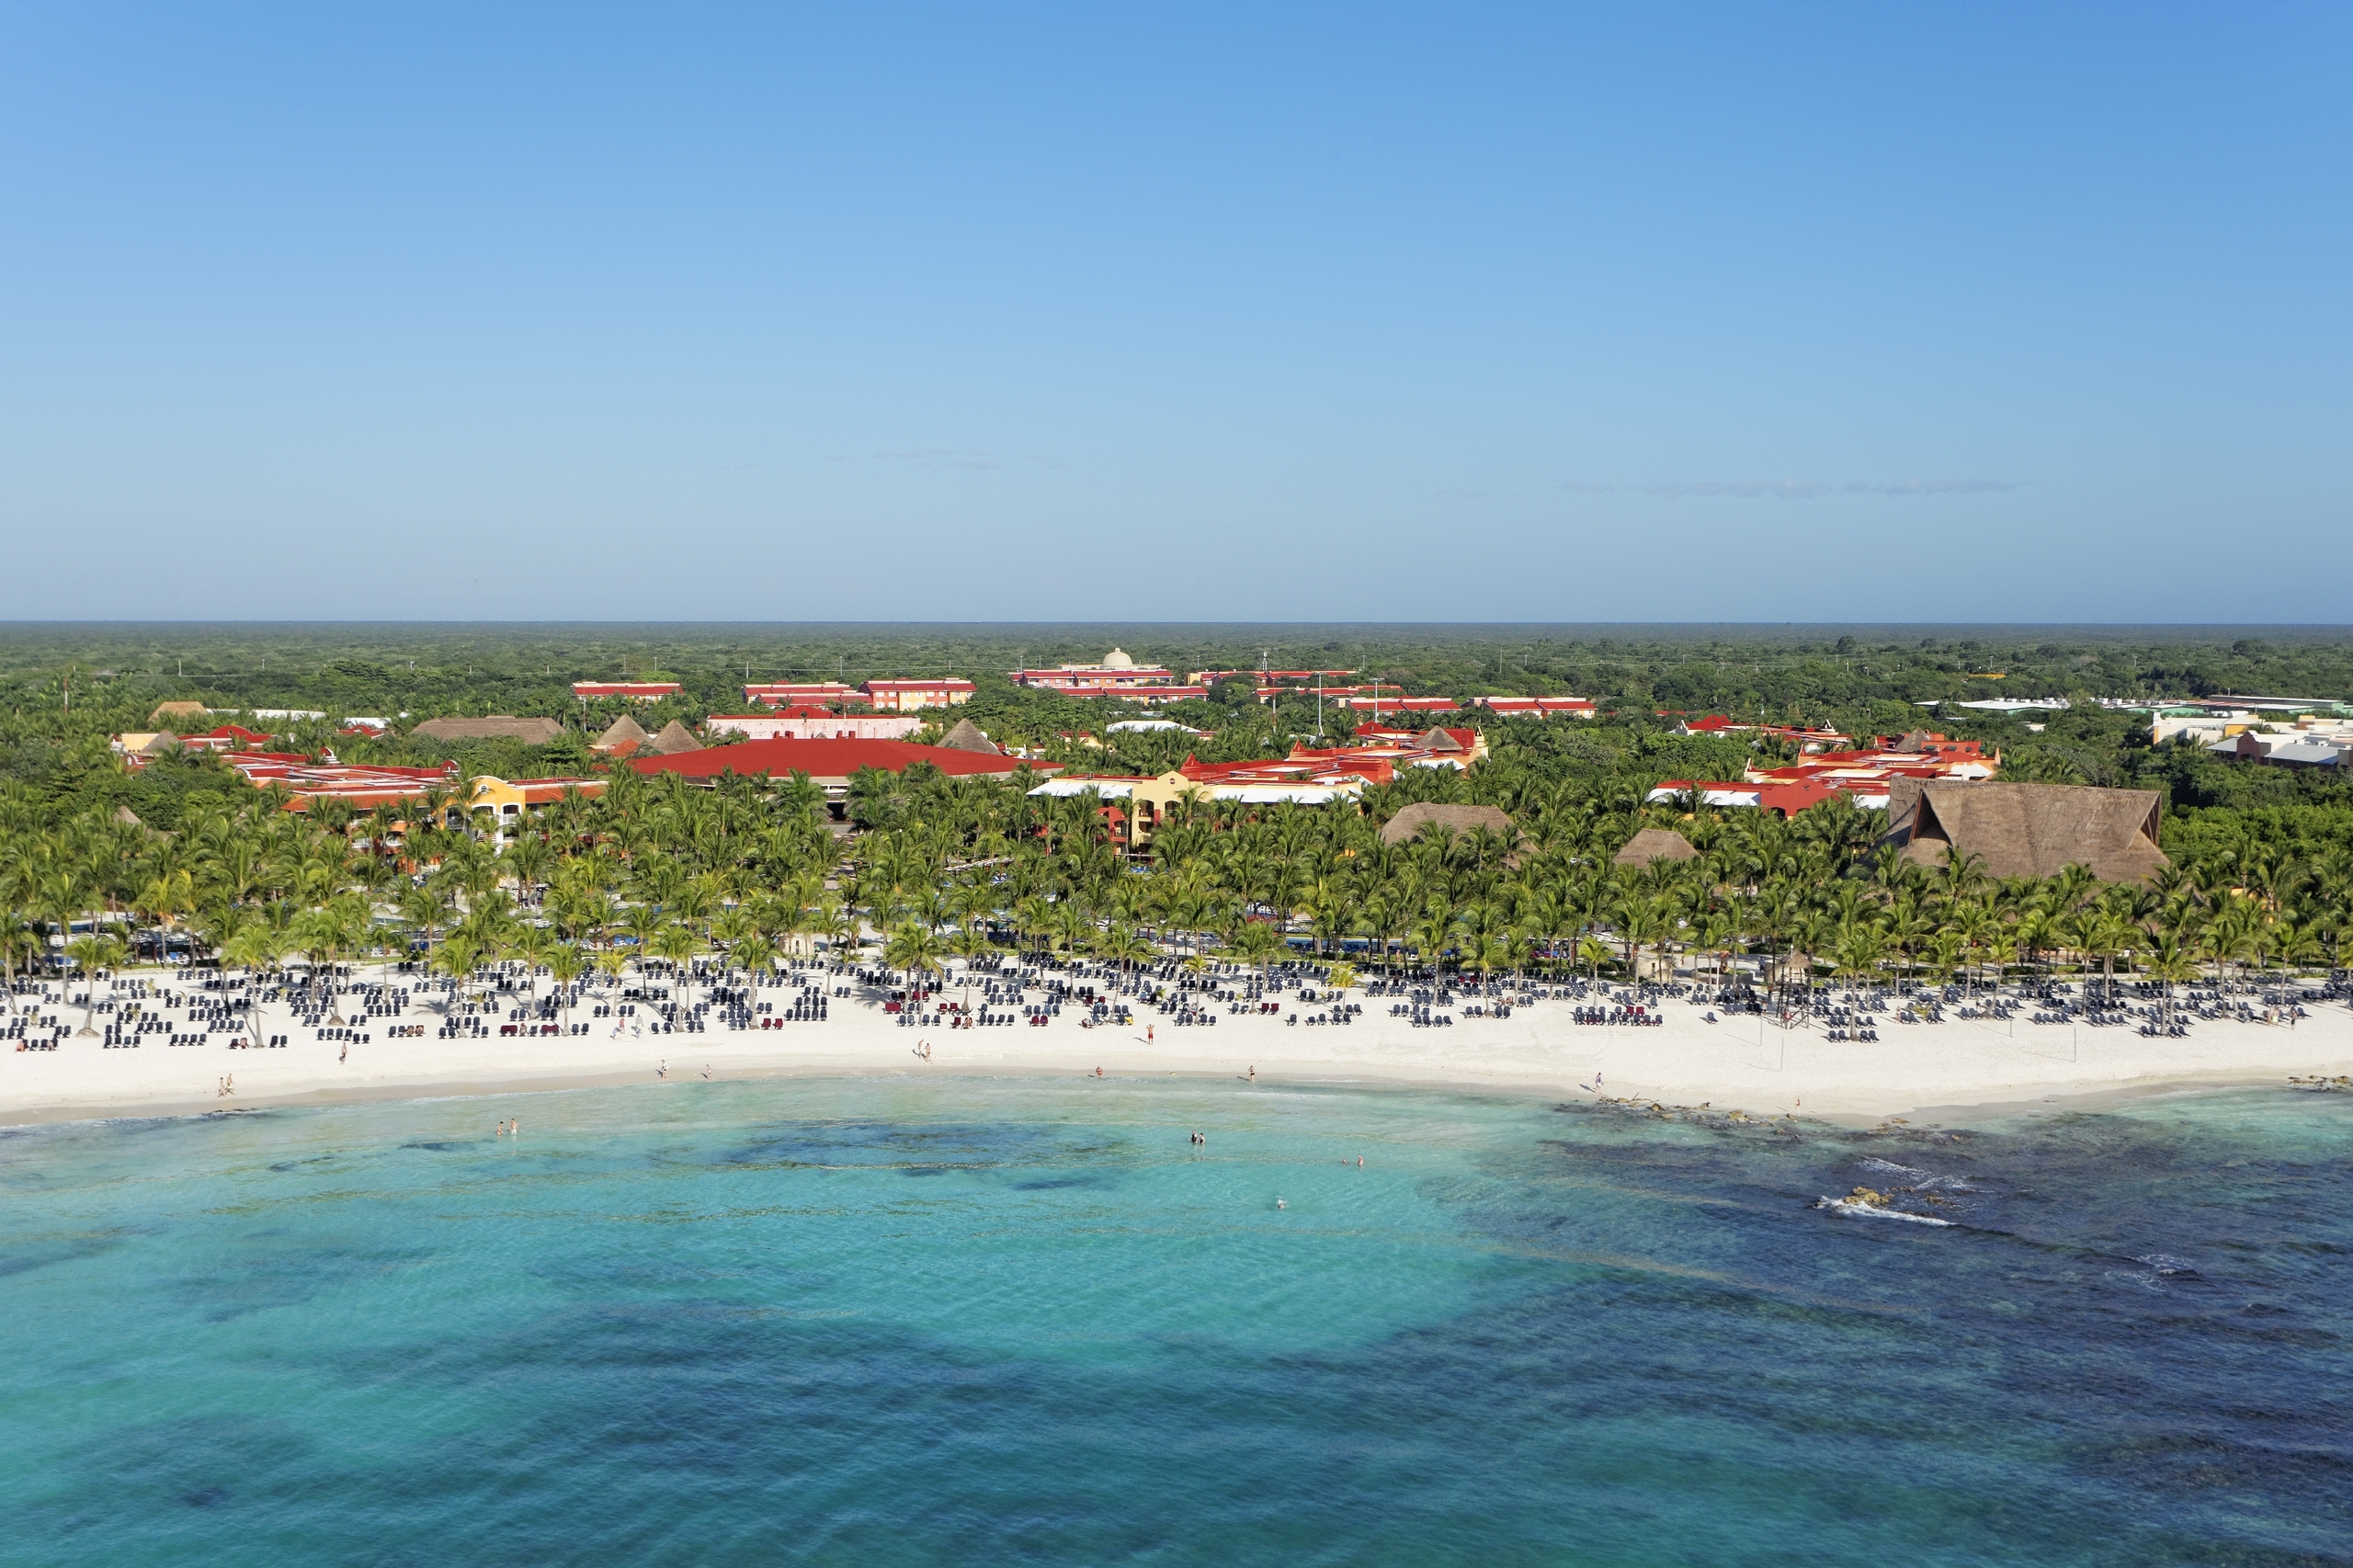 excursions in riviera maya by apple vacations